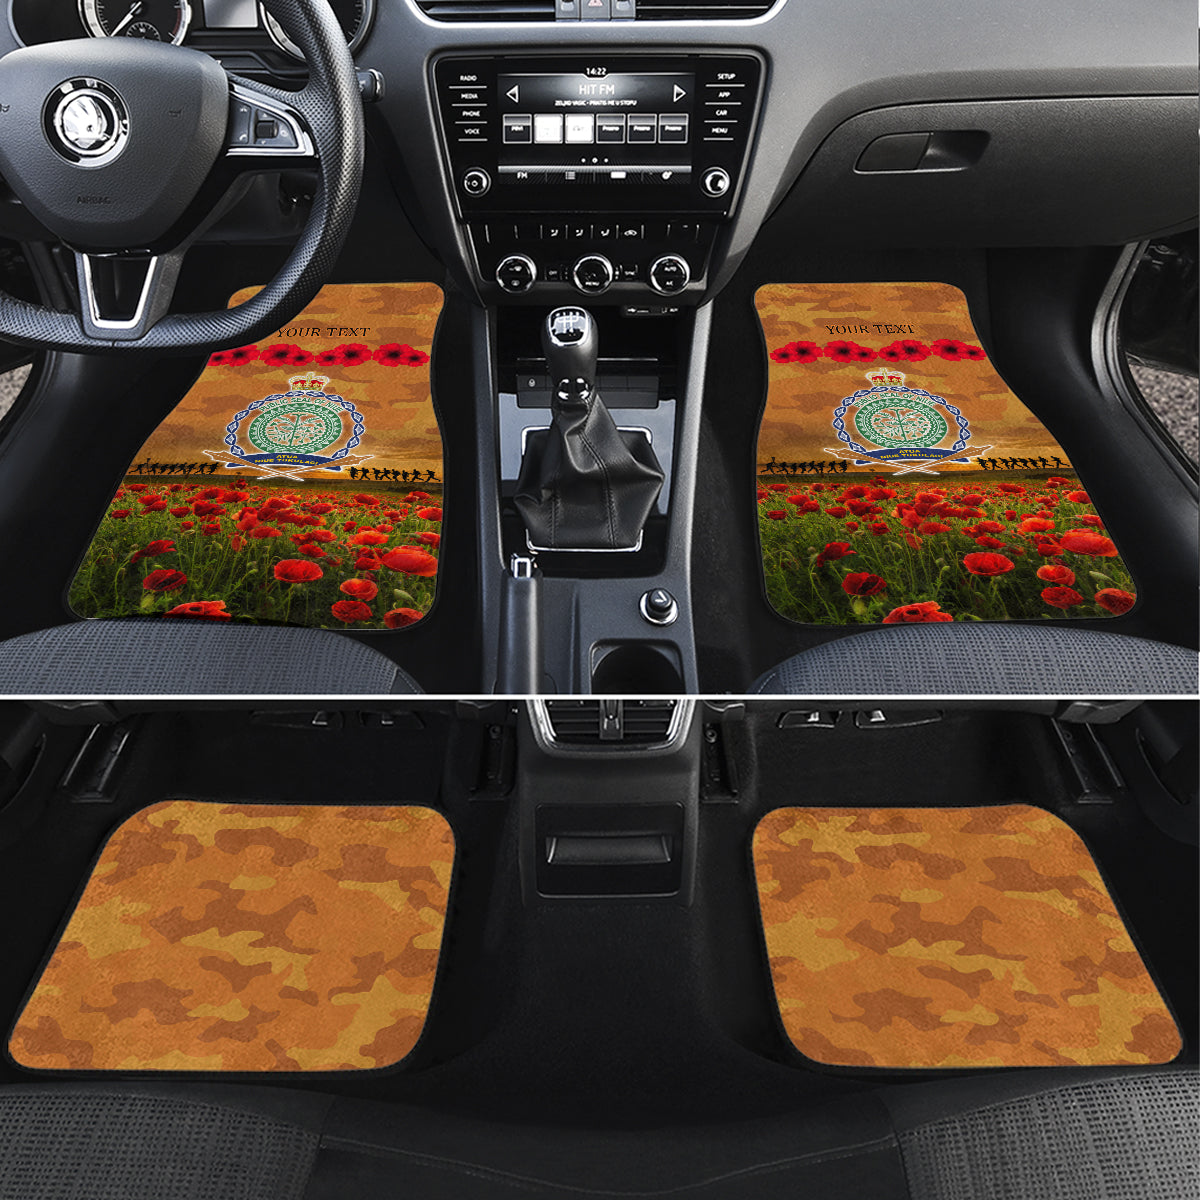 Niue ANZAC Day Personalised Car Mats with Poppy Field LT9 Art - Polynesian Pride